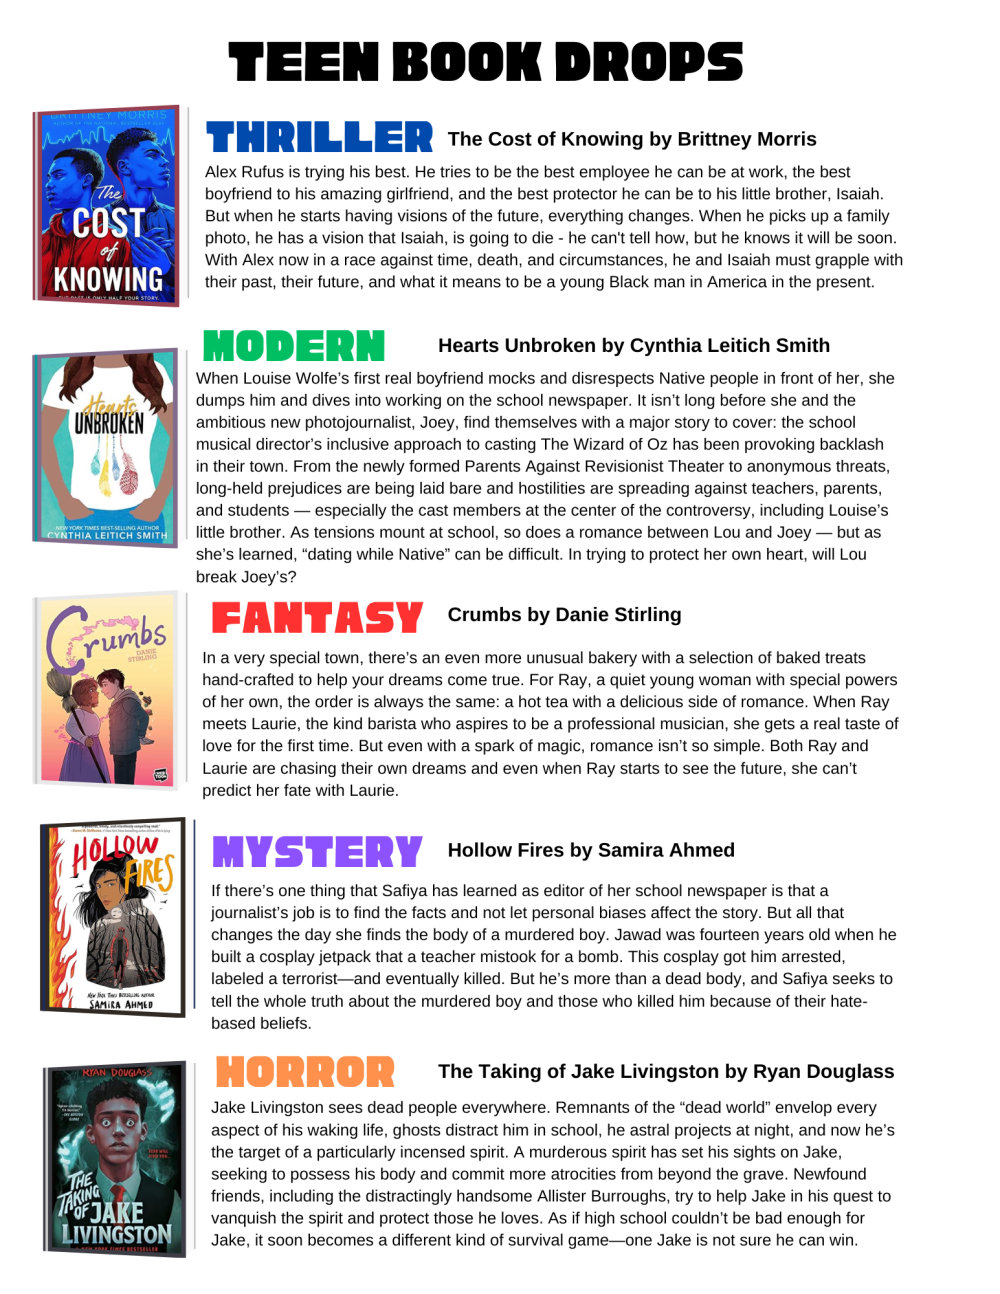 The choices are Thriller: The Cost of Knowing by Brittney Morris, Modern: Hearts Unbroken by Cynthia Leitich Smith, Fantasy: Crumbs by Danie Stirling, Mystery: Hollow Fires by Samira Ahmed, Horror: The Taking of Jake Livingston by Ryan Douglass.